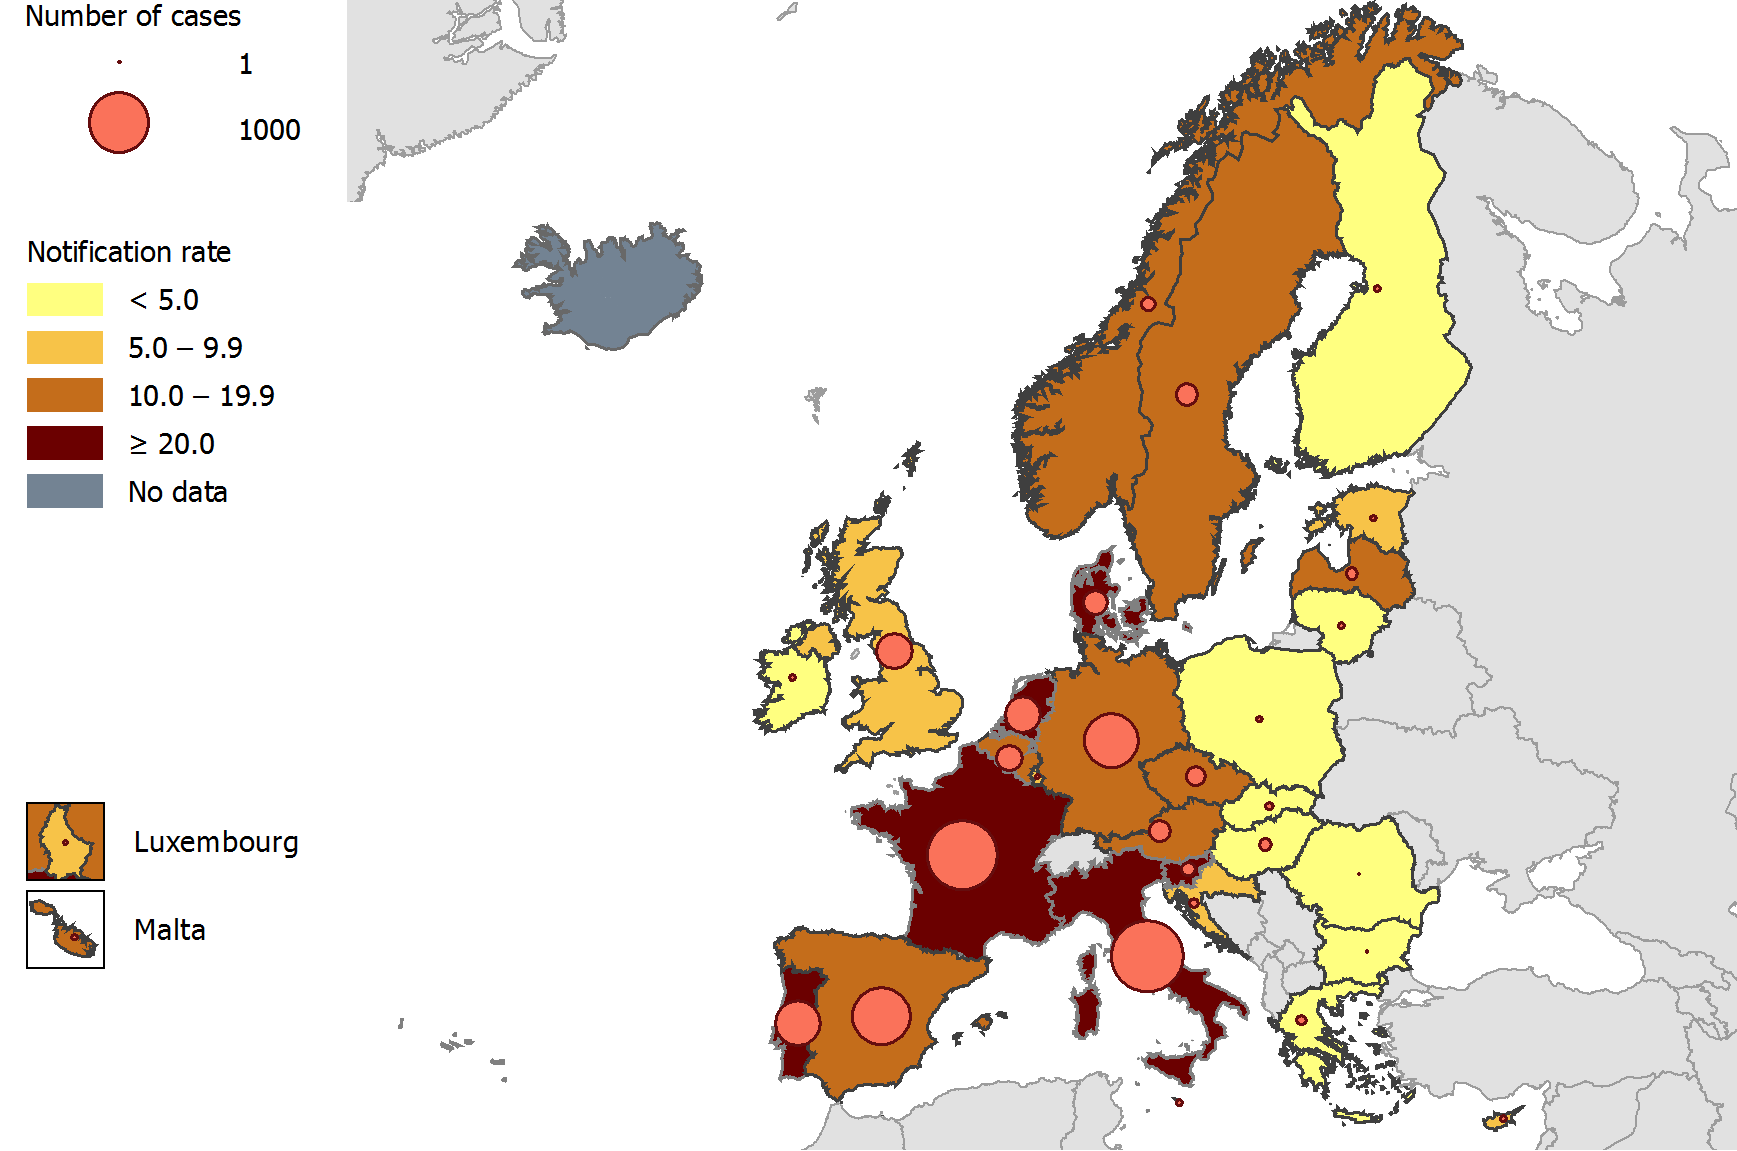 Reported cases and notifications of Legionnaires disease per million, by